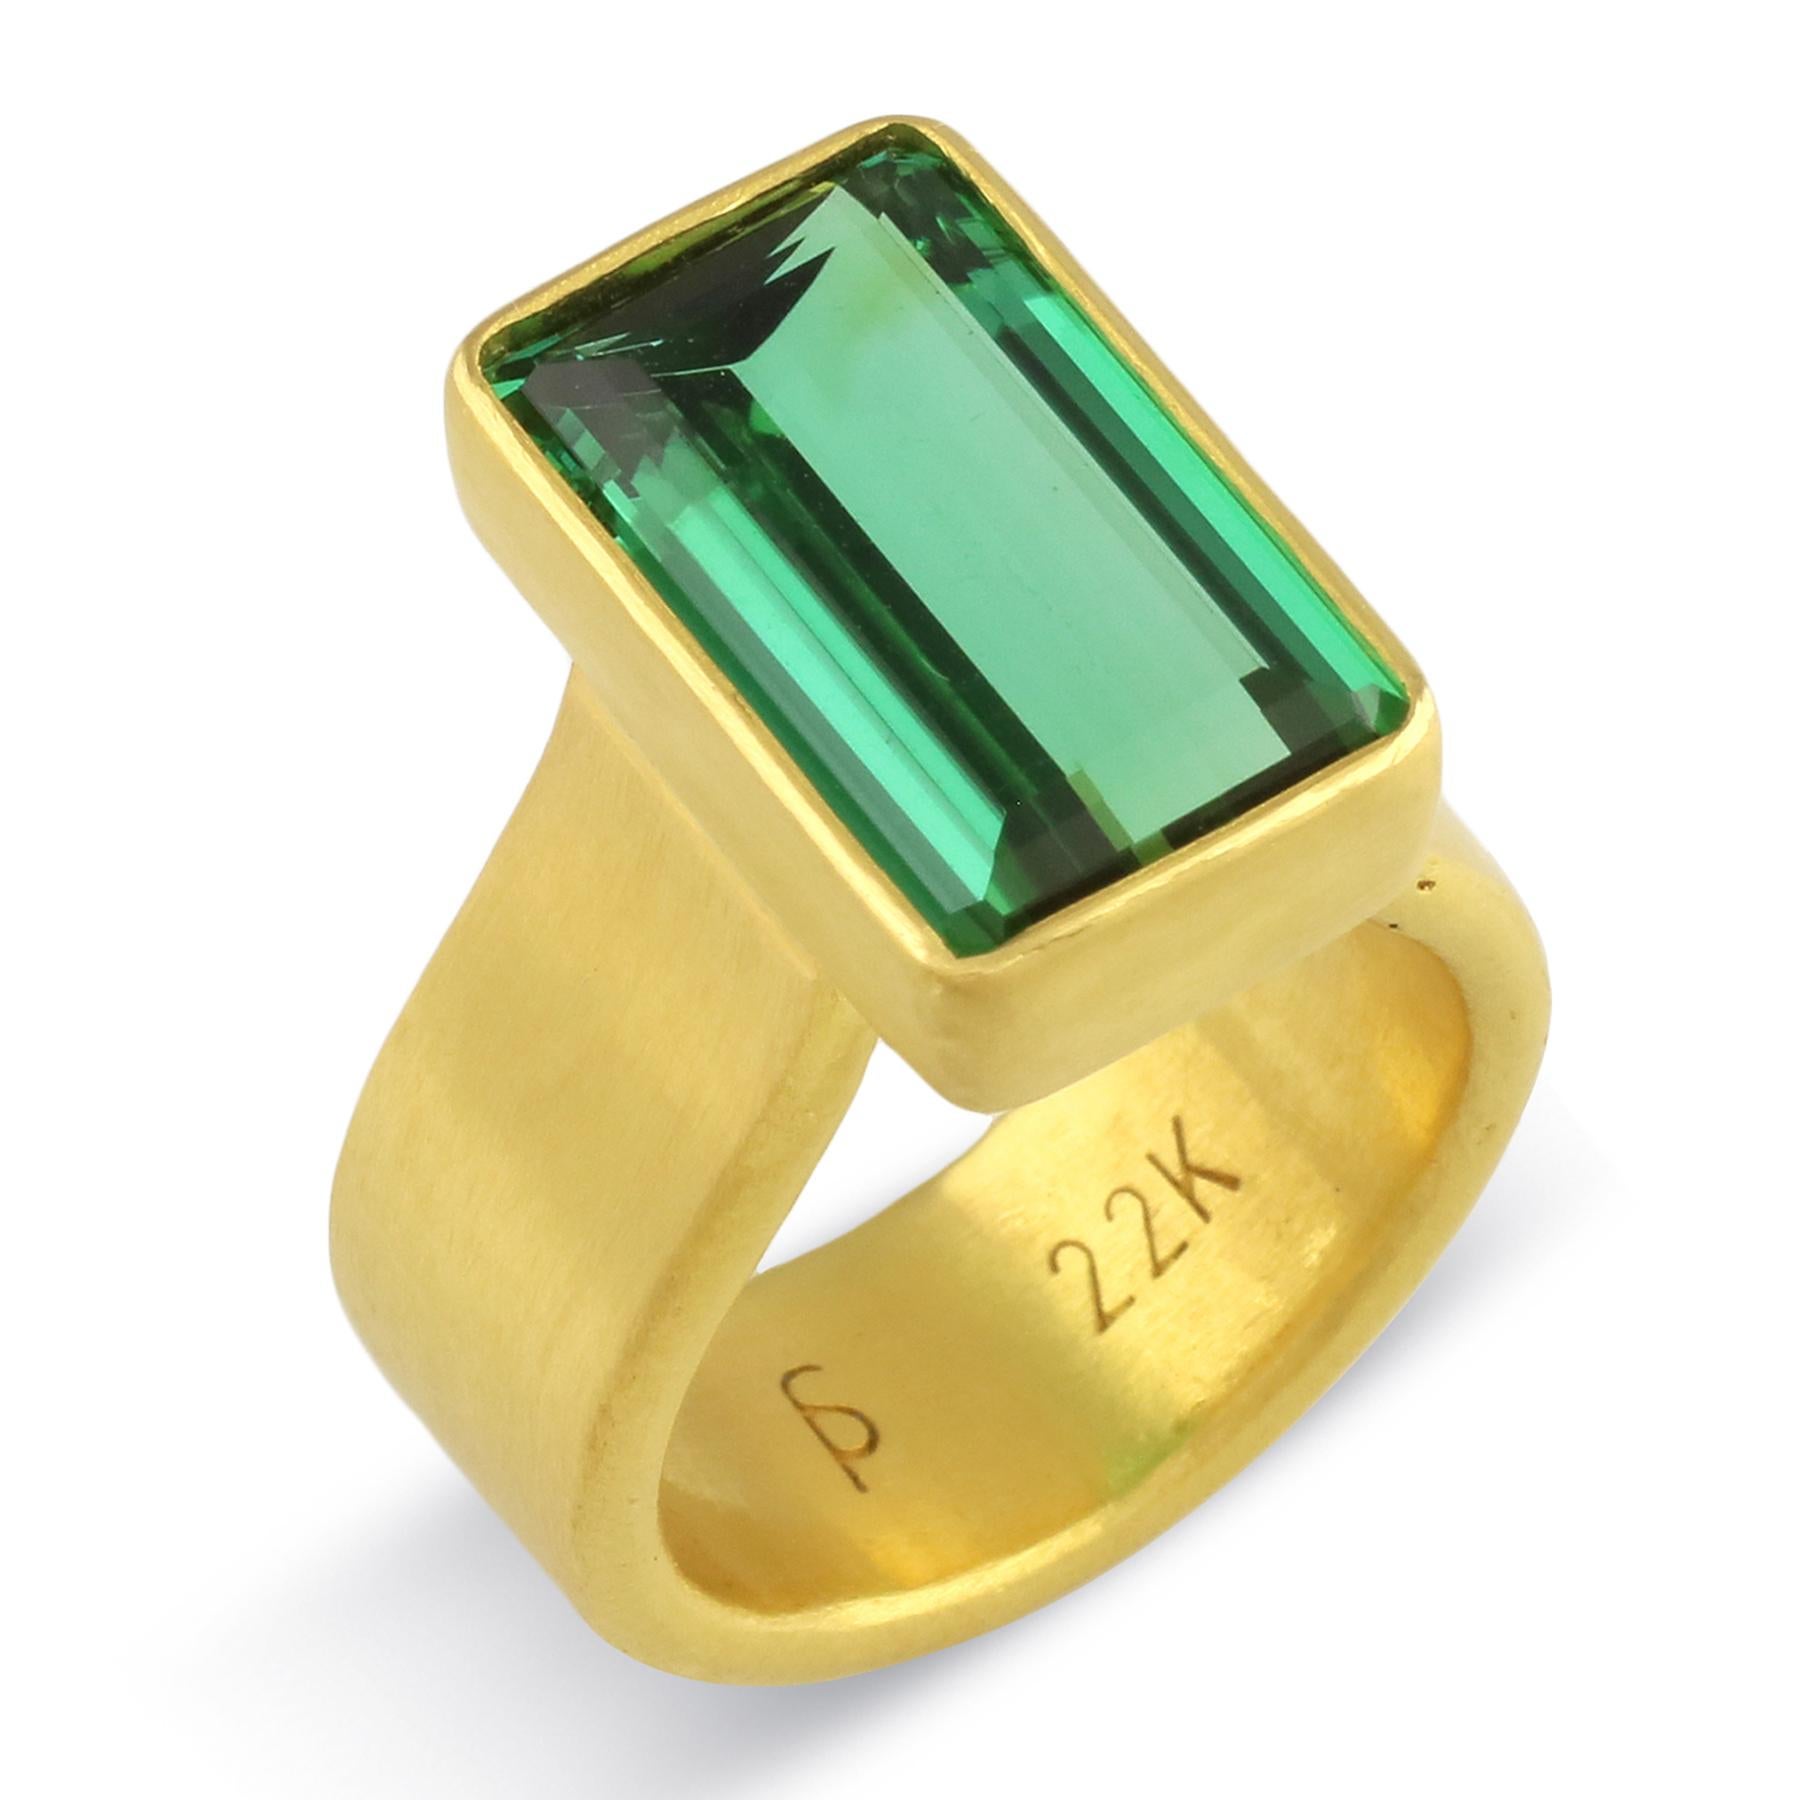 PHILIPPE SPENCER 8.4 Ct. Extra-Fine Tourmaline Statement Ring in 22K Gold In New Condition For Sale In Key West, FL